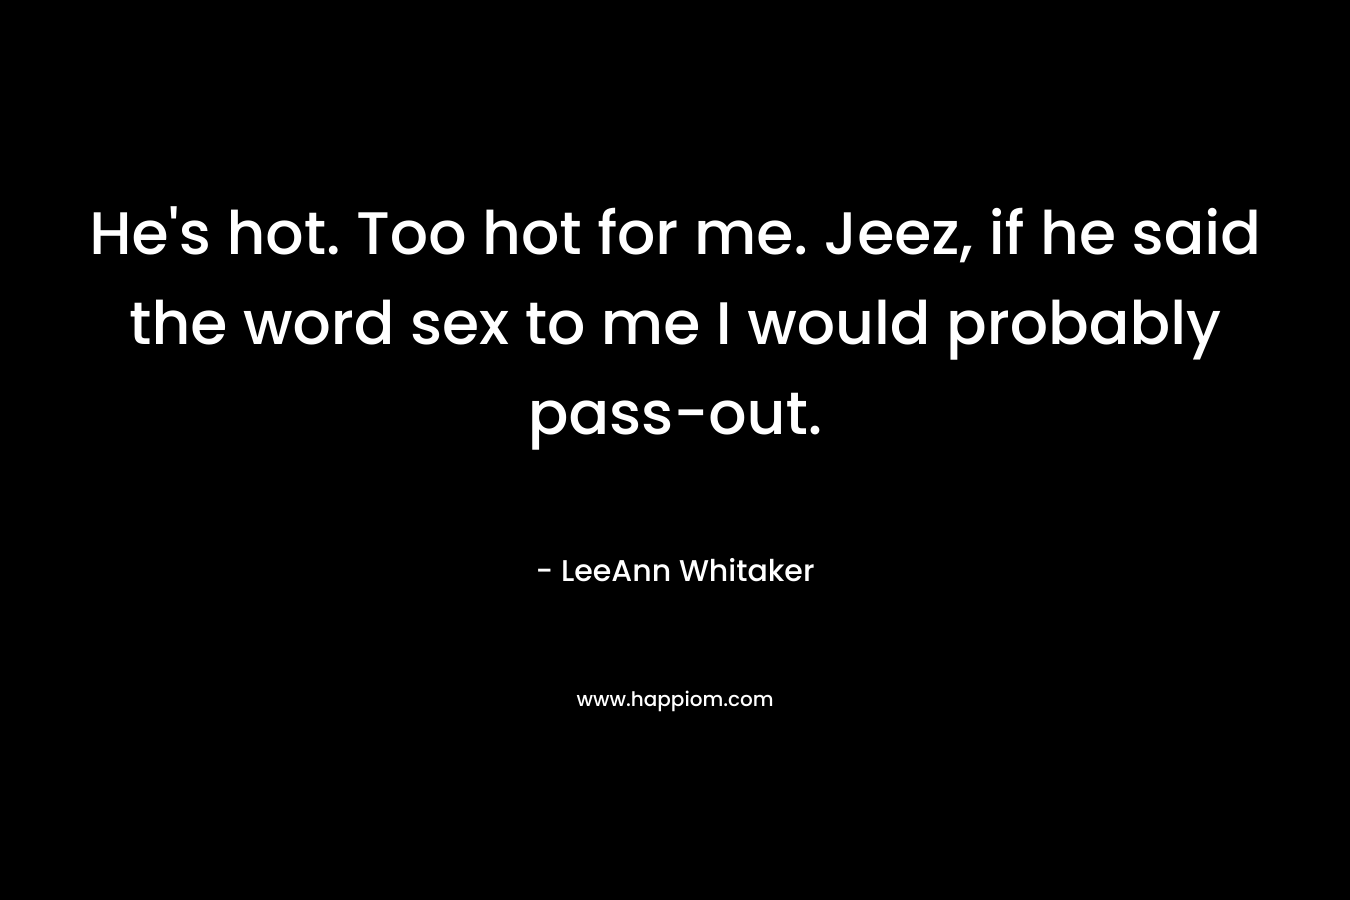 He’s hot. Too hot for me. Jeez, if he said the word sex to me I would probably pass-out. – LeeAnn Whitaker